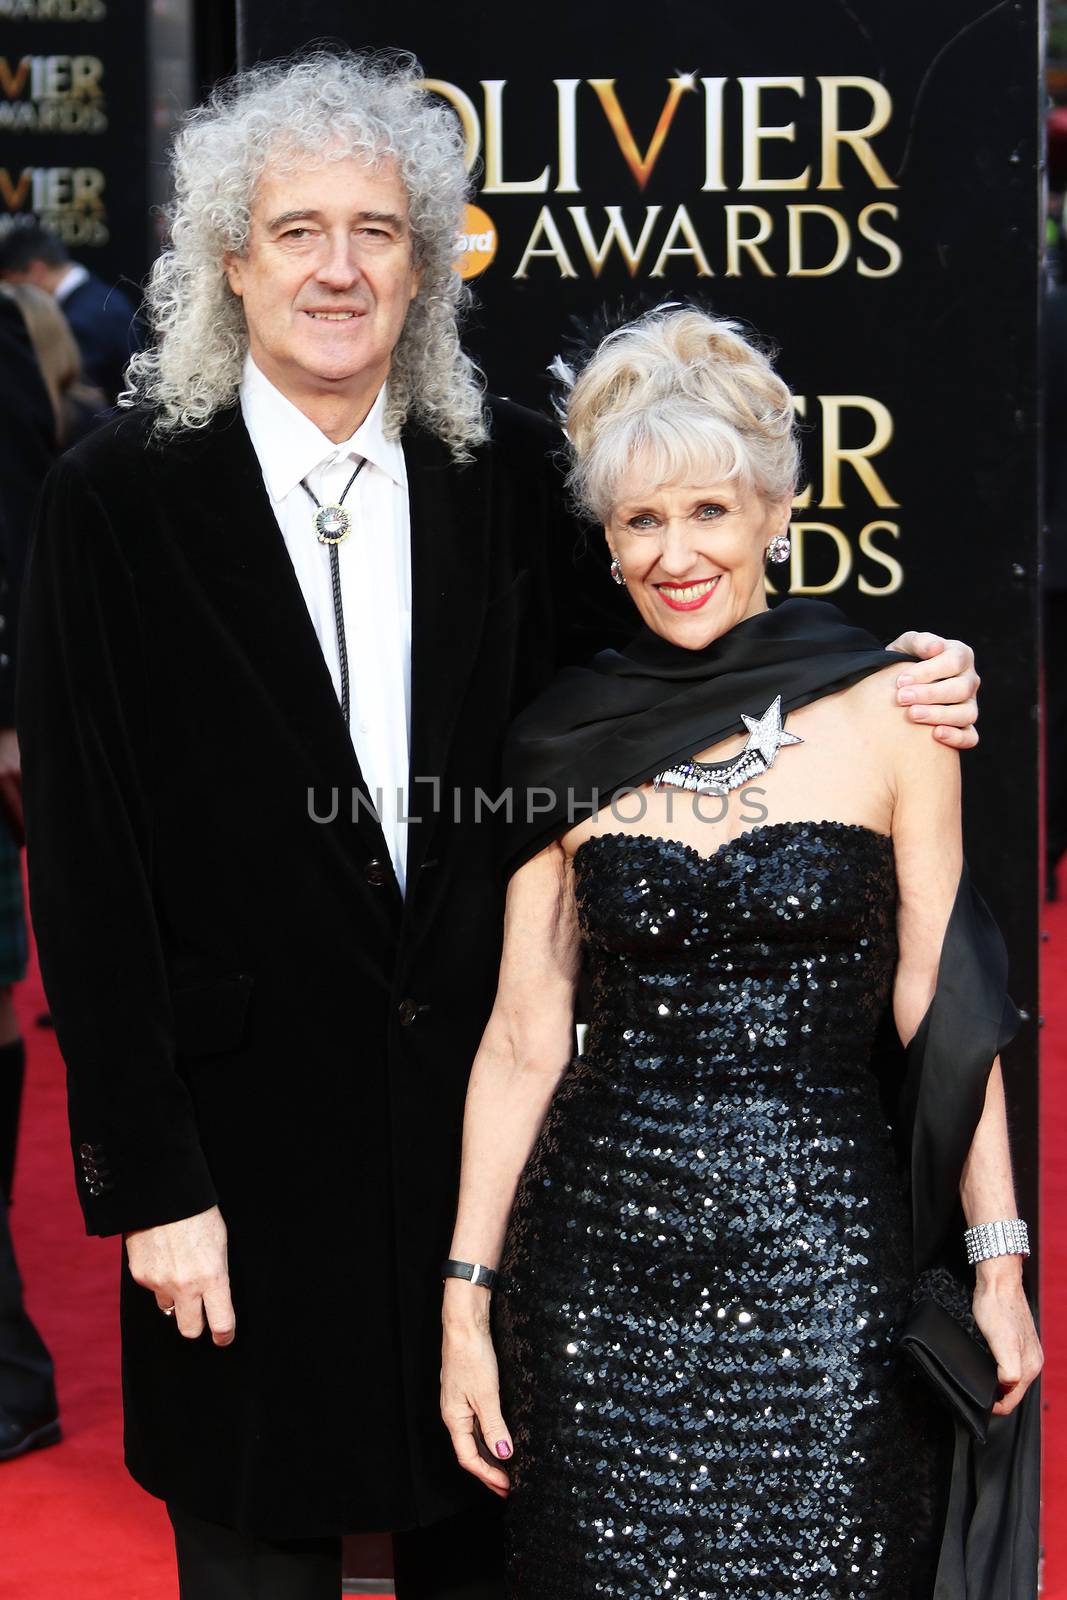 UK, London: Brian May and Anita Dobson hit the red carpet for the Olivier Awards at the Royal Opera House in London on April 3, 2016.